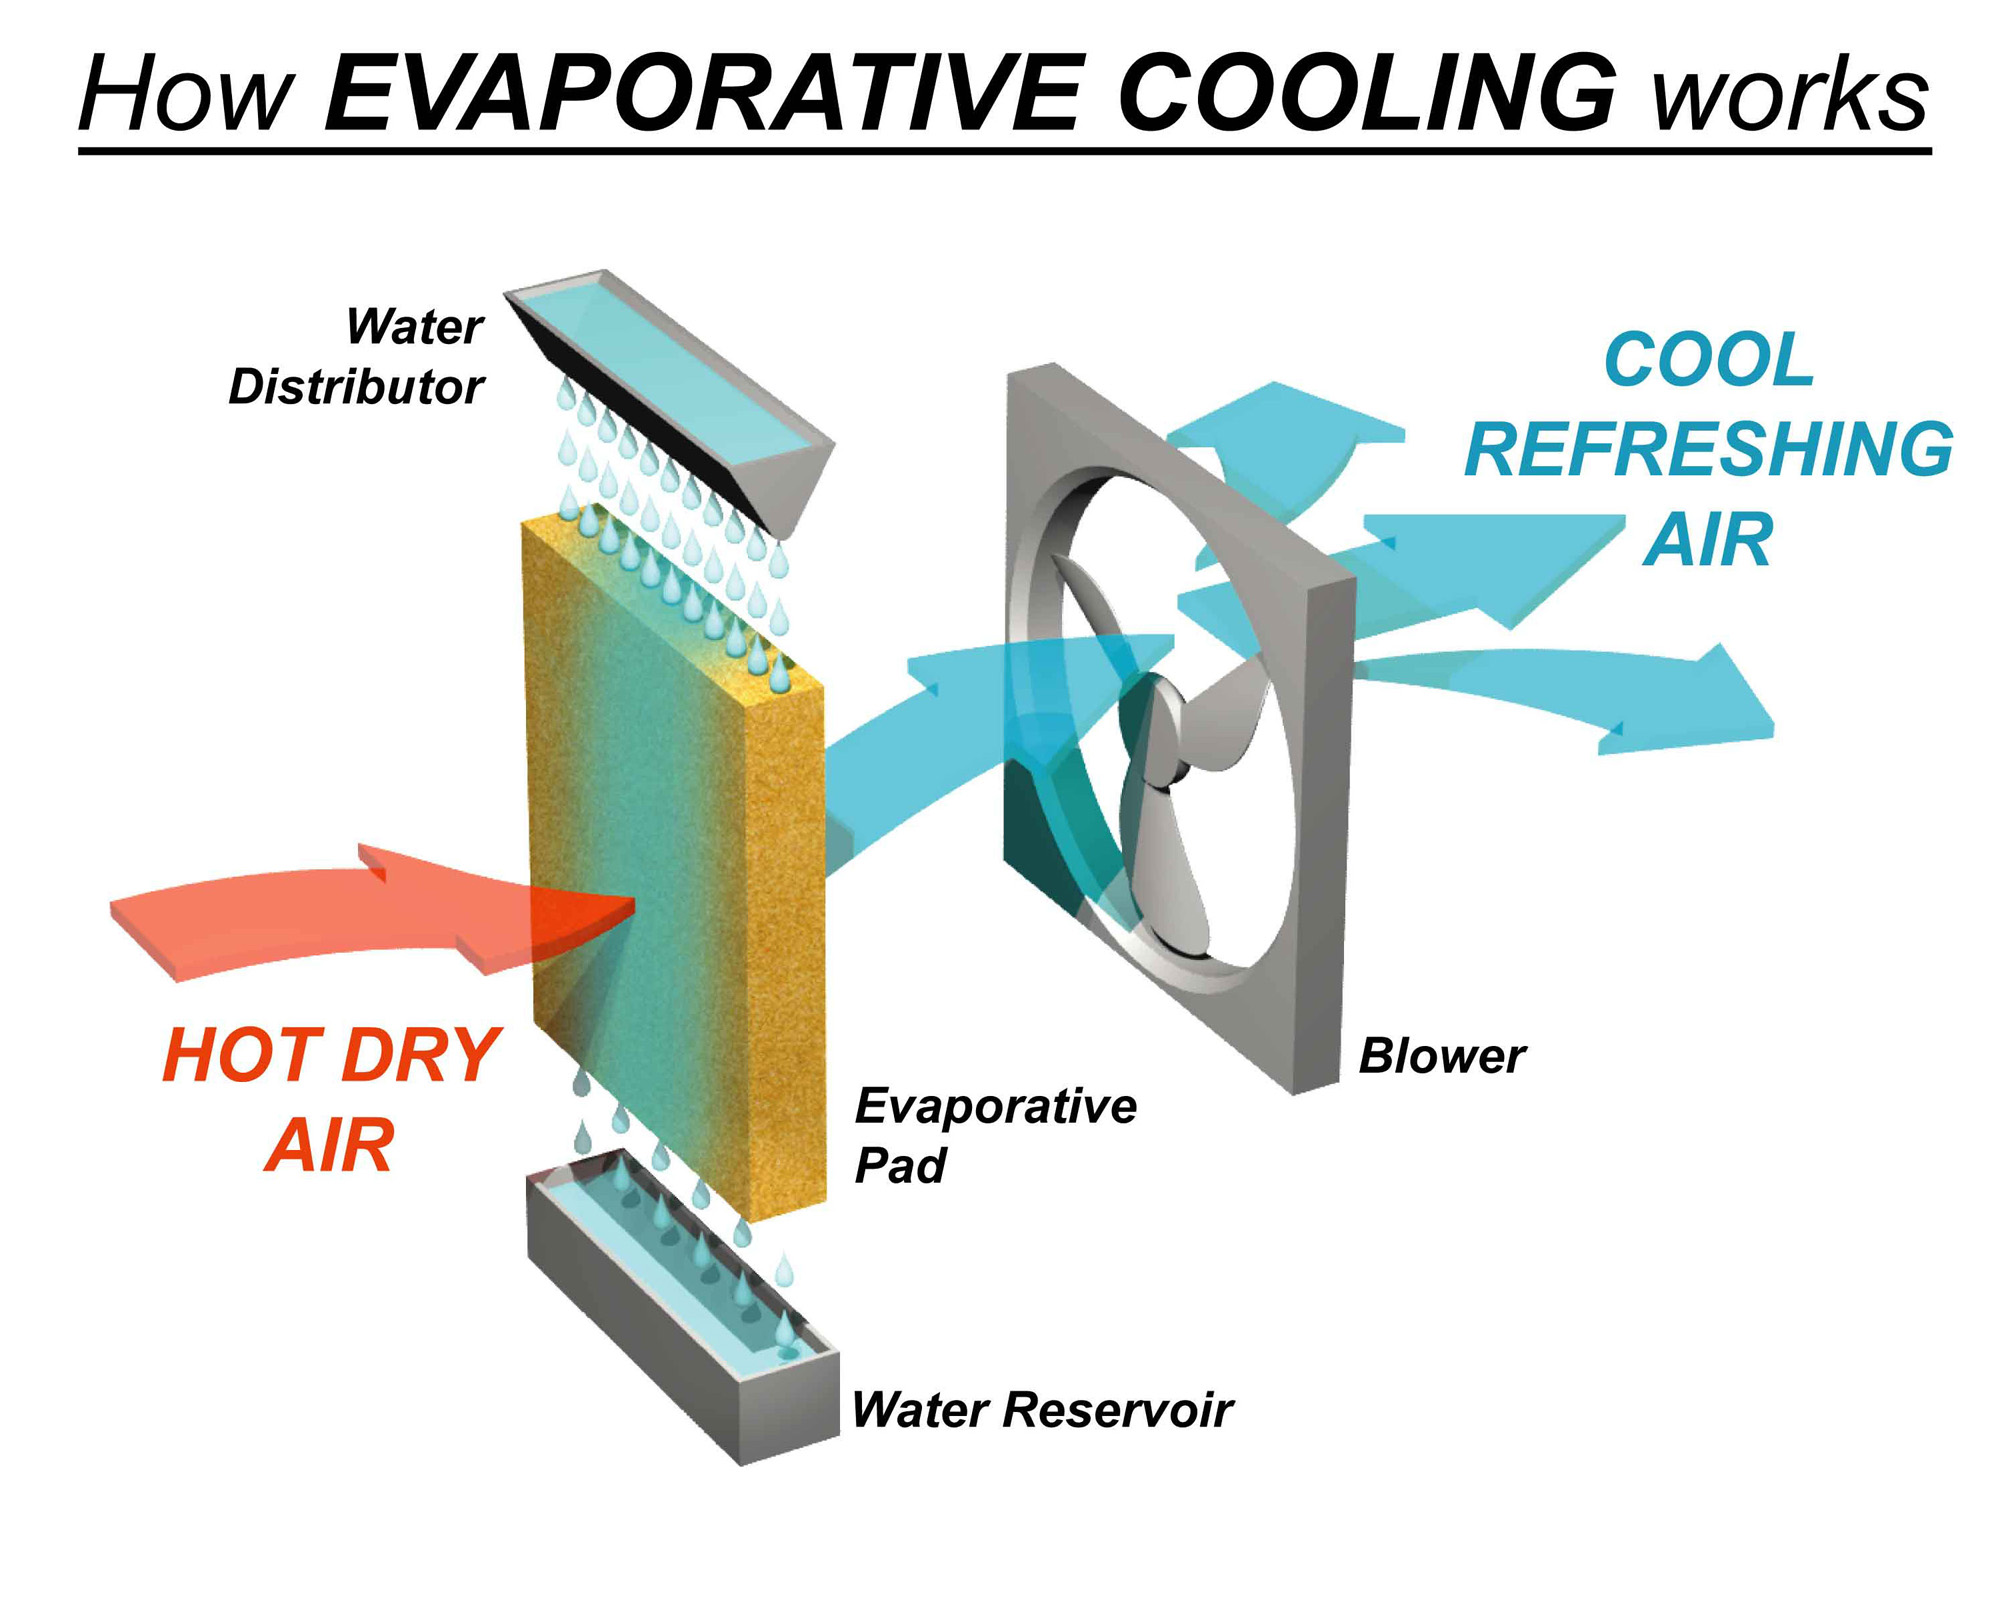 A graphic showing how evaporative cooling works